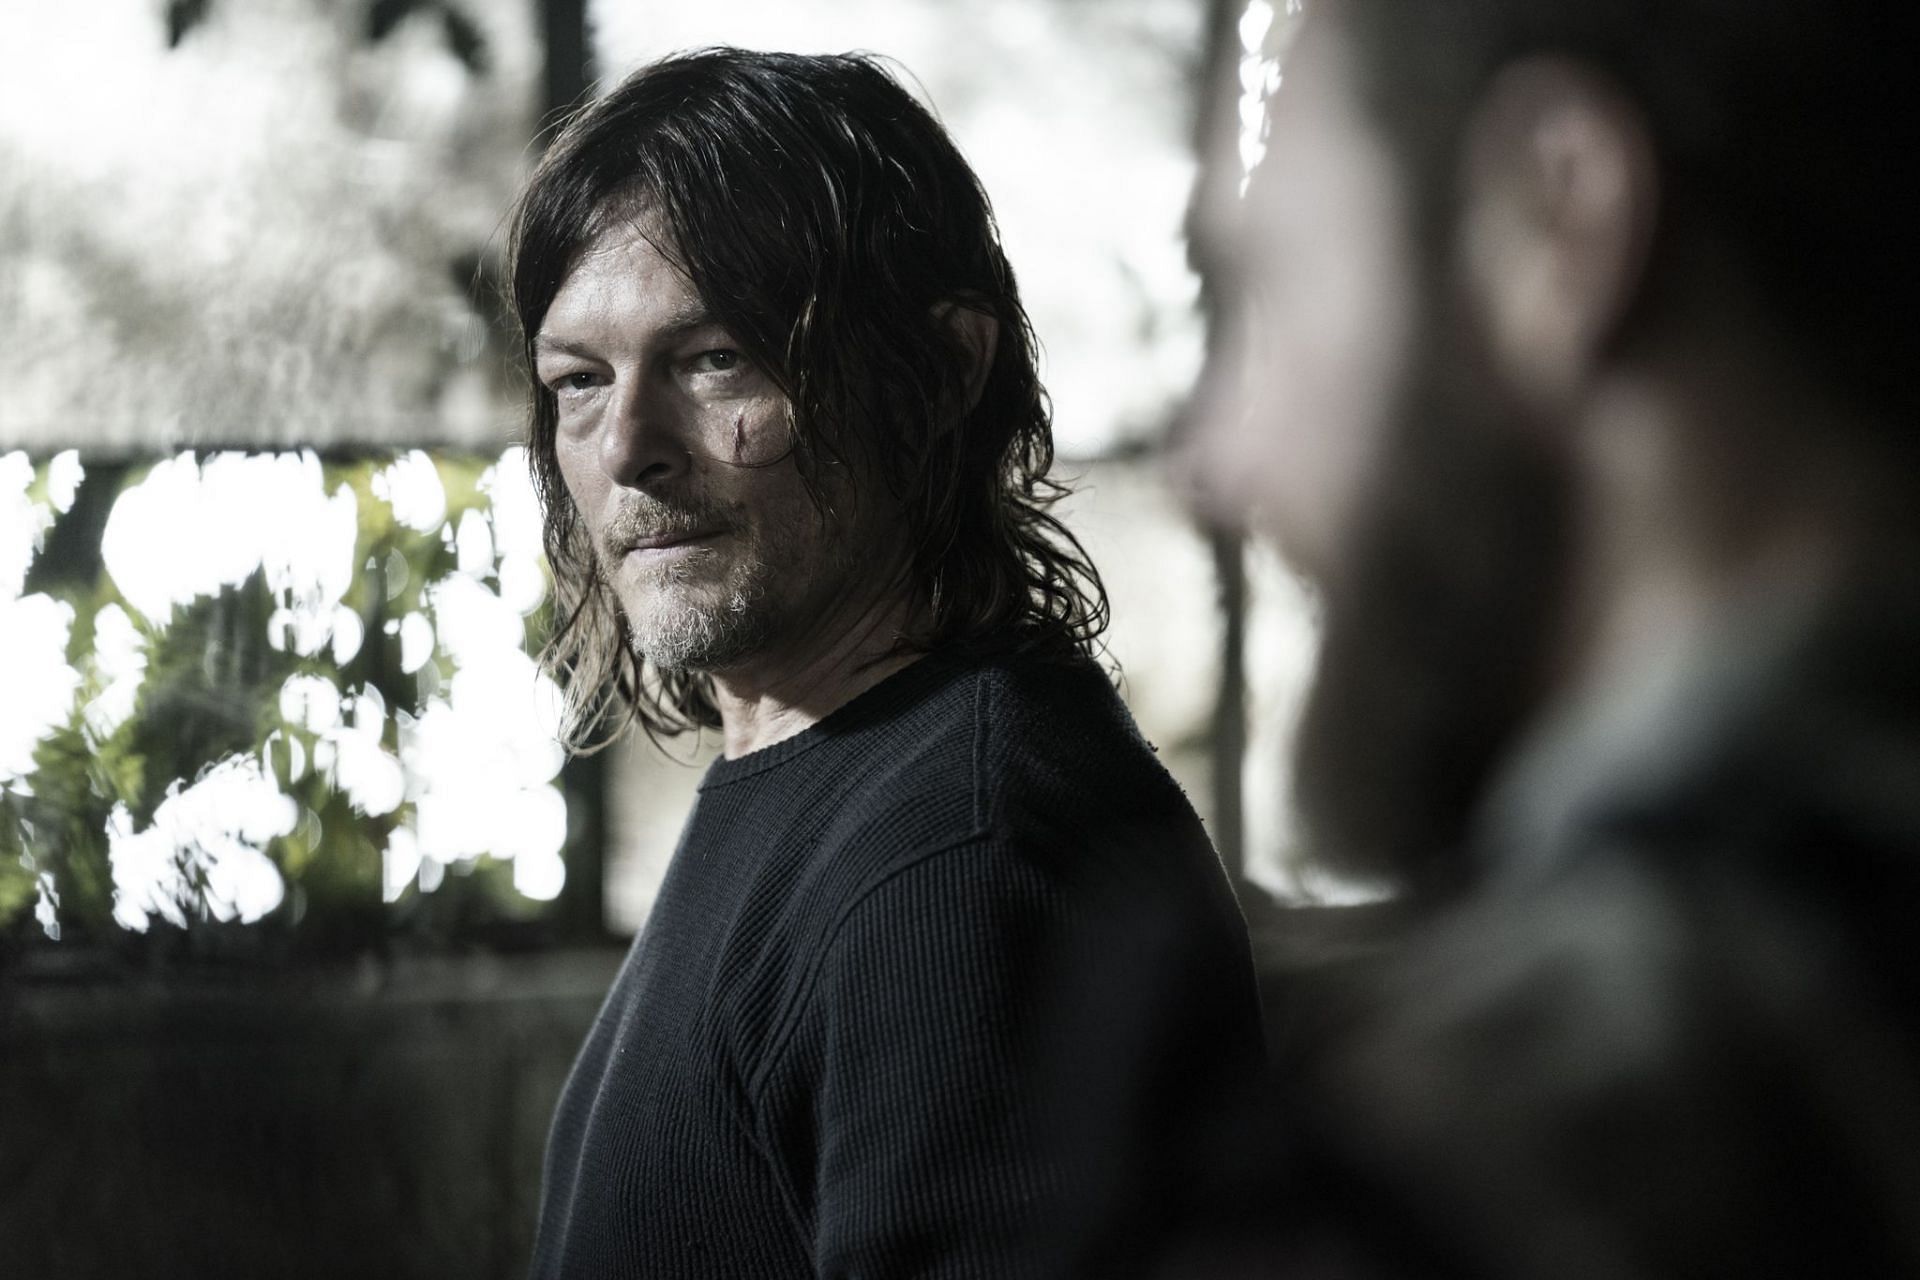 Norman Reedus as Daryl Dixon (Image courtesy of AMC Networks)